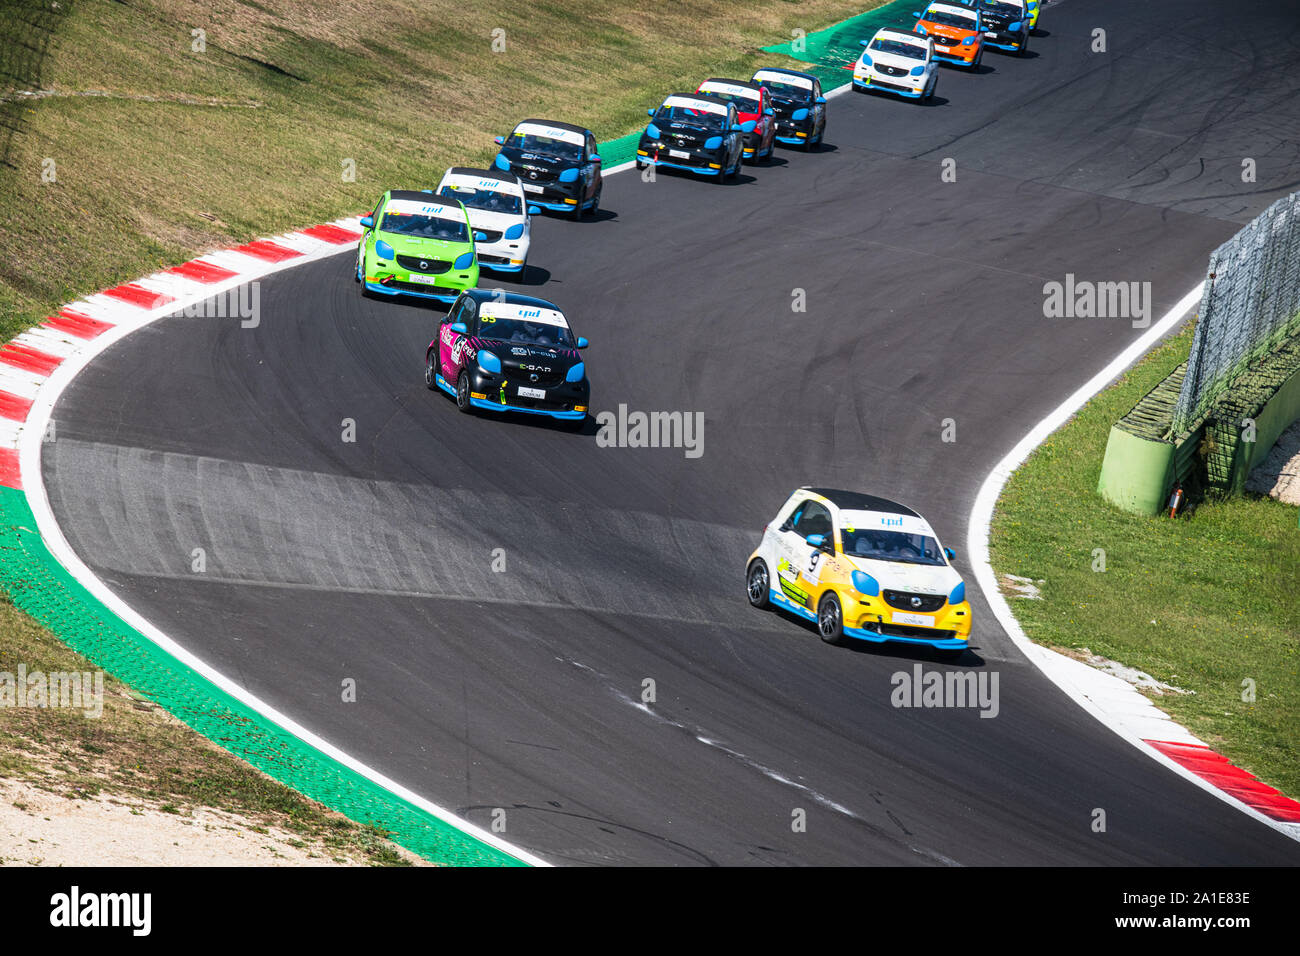 Vallelunga, Italy september 14 2019. High angle view of asphalt circuit with Smart electric engine racing car in action during the race Stock Photo